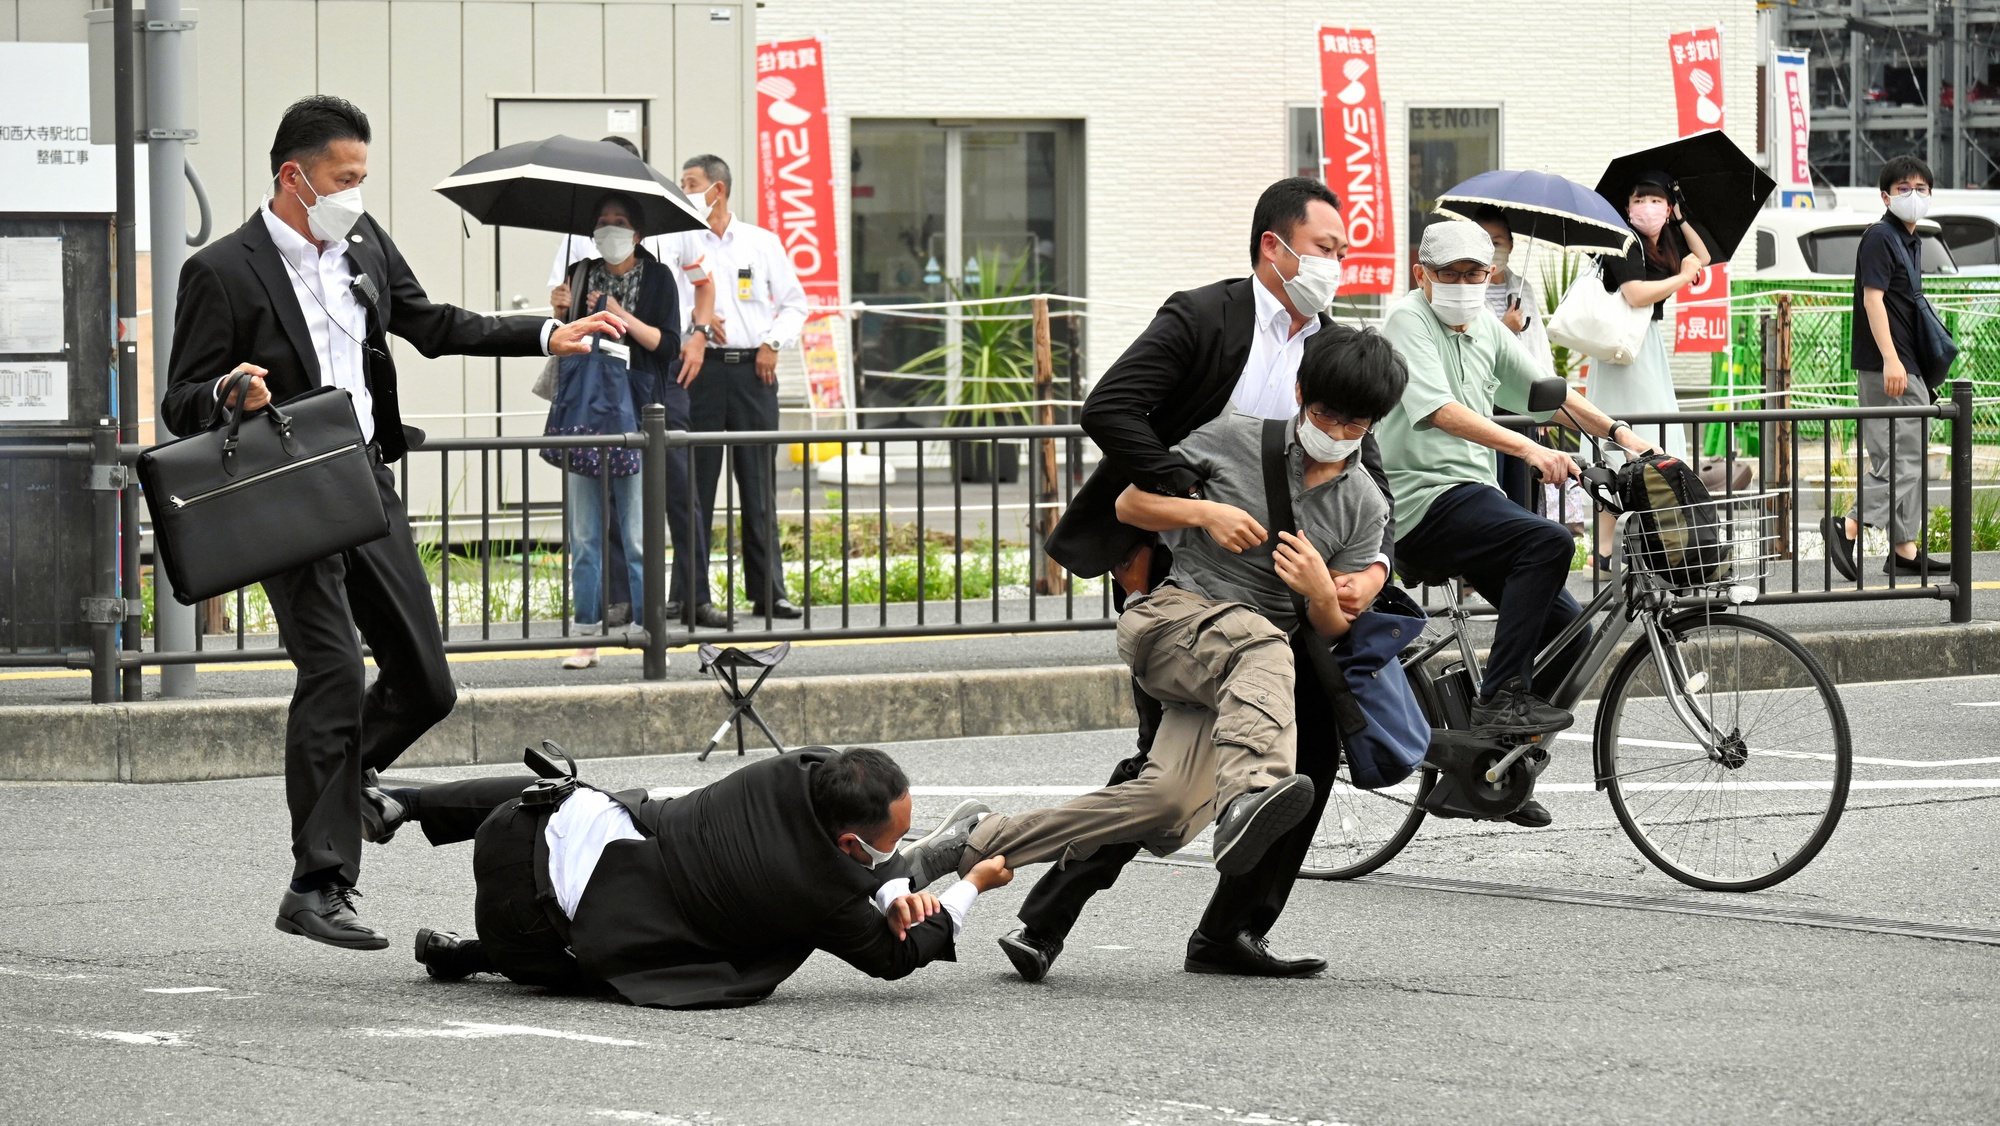 epa10058891 Security police tackle a suspect who is believed to have shot former Prime Minister Shinzo Abe outside Yamato-Saidaiji  Station in Nara, Japan, 08 July 2022. The suspect identified as Tetsuya Yamagami was arrested and taken into custody. According to Japan&#039;s national broadcaster, former Prime Minister Shinzo Abe died of his injuries on 08 July 2022, hours after being shot during an Upper House election campaign act to support a party candidate, outside Yamato-Saidaiji railway station in Nara, western Japan.  EPA/The Asahi Shimbun - JAPAN OUT - EDITORIAL USE ONLY FOR ONE MONTH until 08 August 2022 -  EDITORIAL USE ONLY